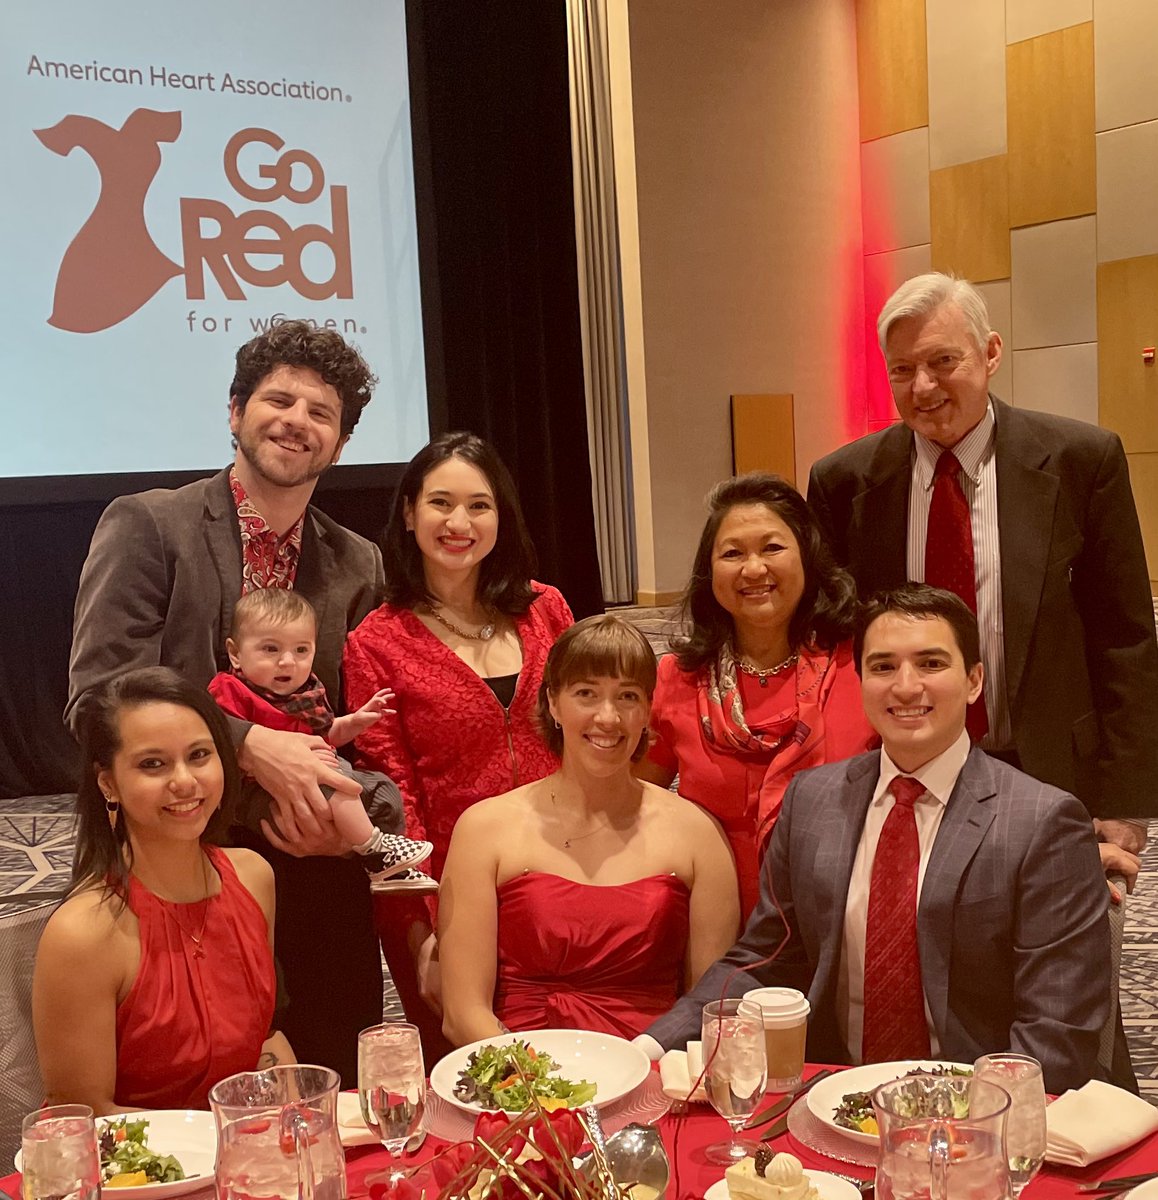 Loved that my whole family came to celebrate with us! Even my grandson wore red! @AmericanHeartIL @kevindharker @cardio10s @gina_lundberg @DrToniyaSingh @KTamirisaMD @biljana_parapid @DrLaxmiMehta @drmalissawood @drstaceyrosen @DrJMieres @WomenHeartOrg @WomenAs1 @mmamas1973